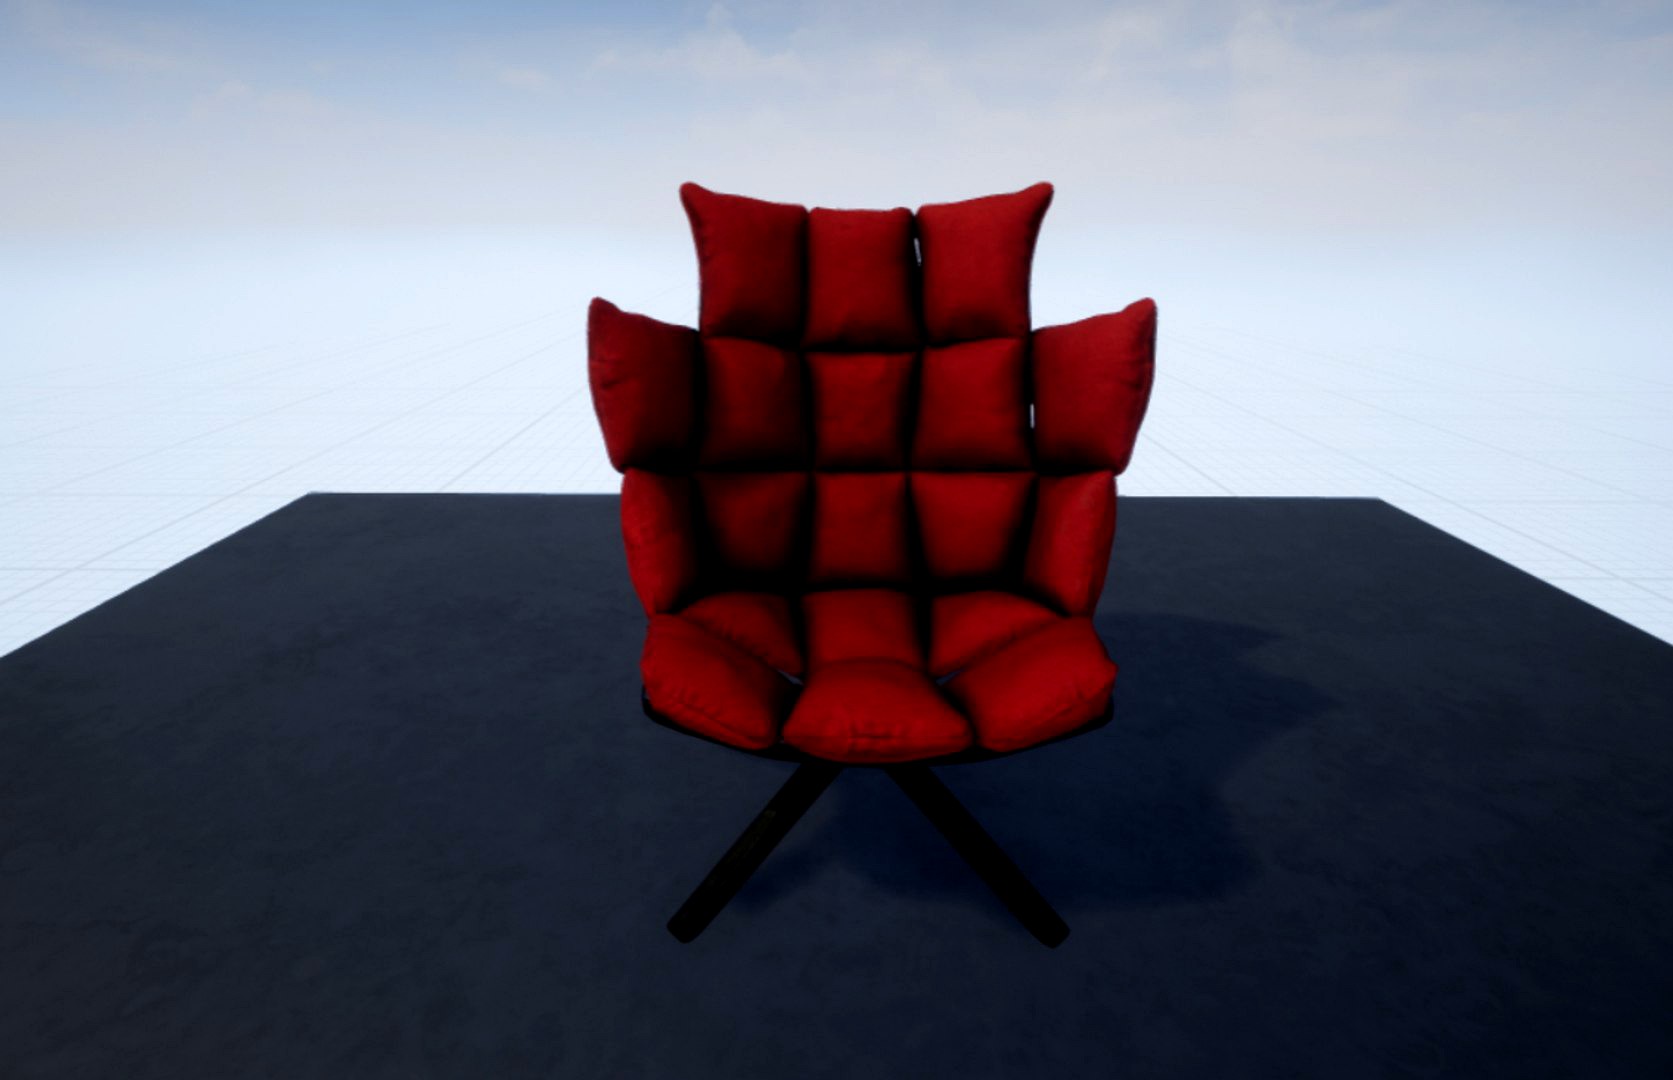 Armchair - Real time